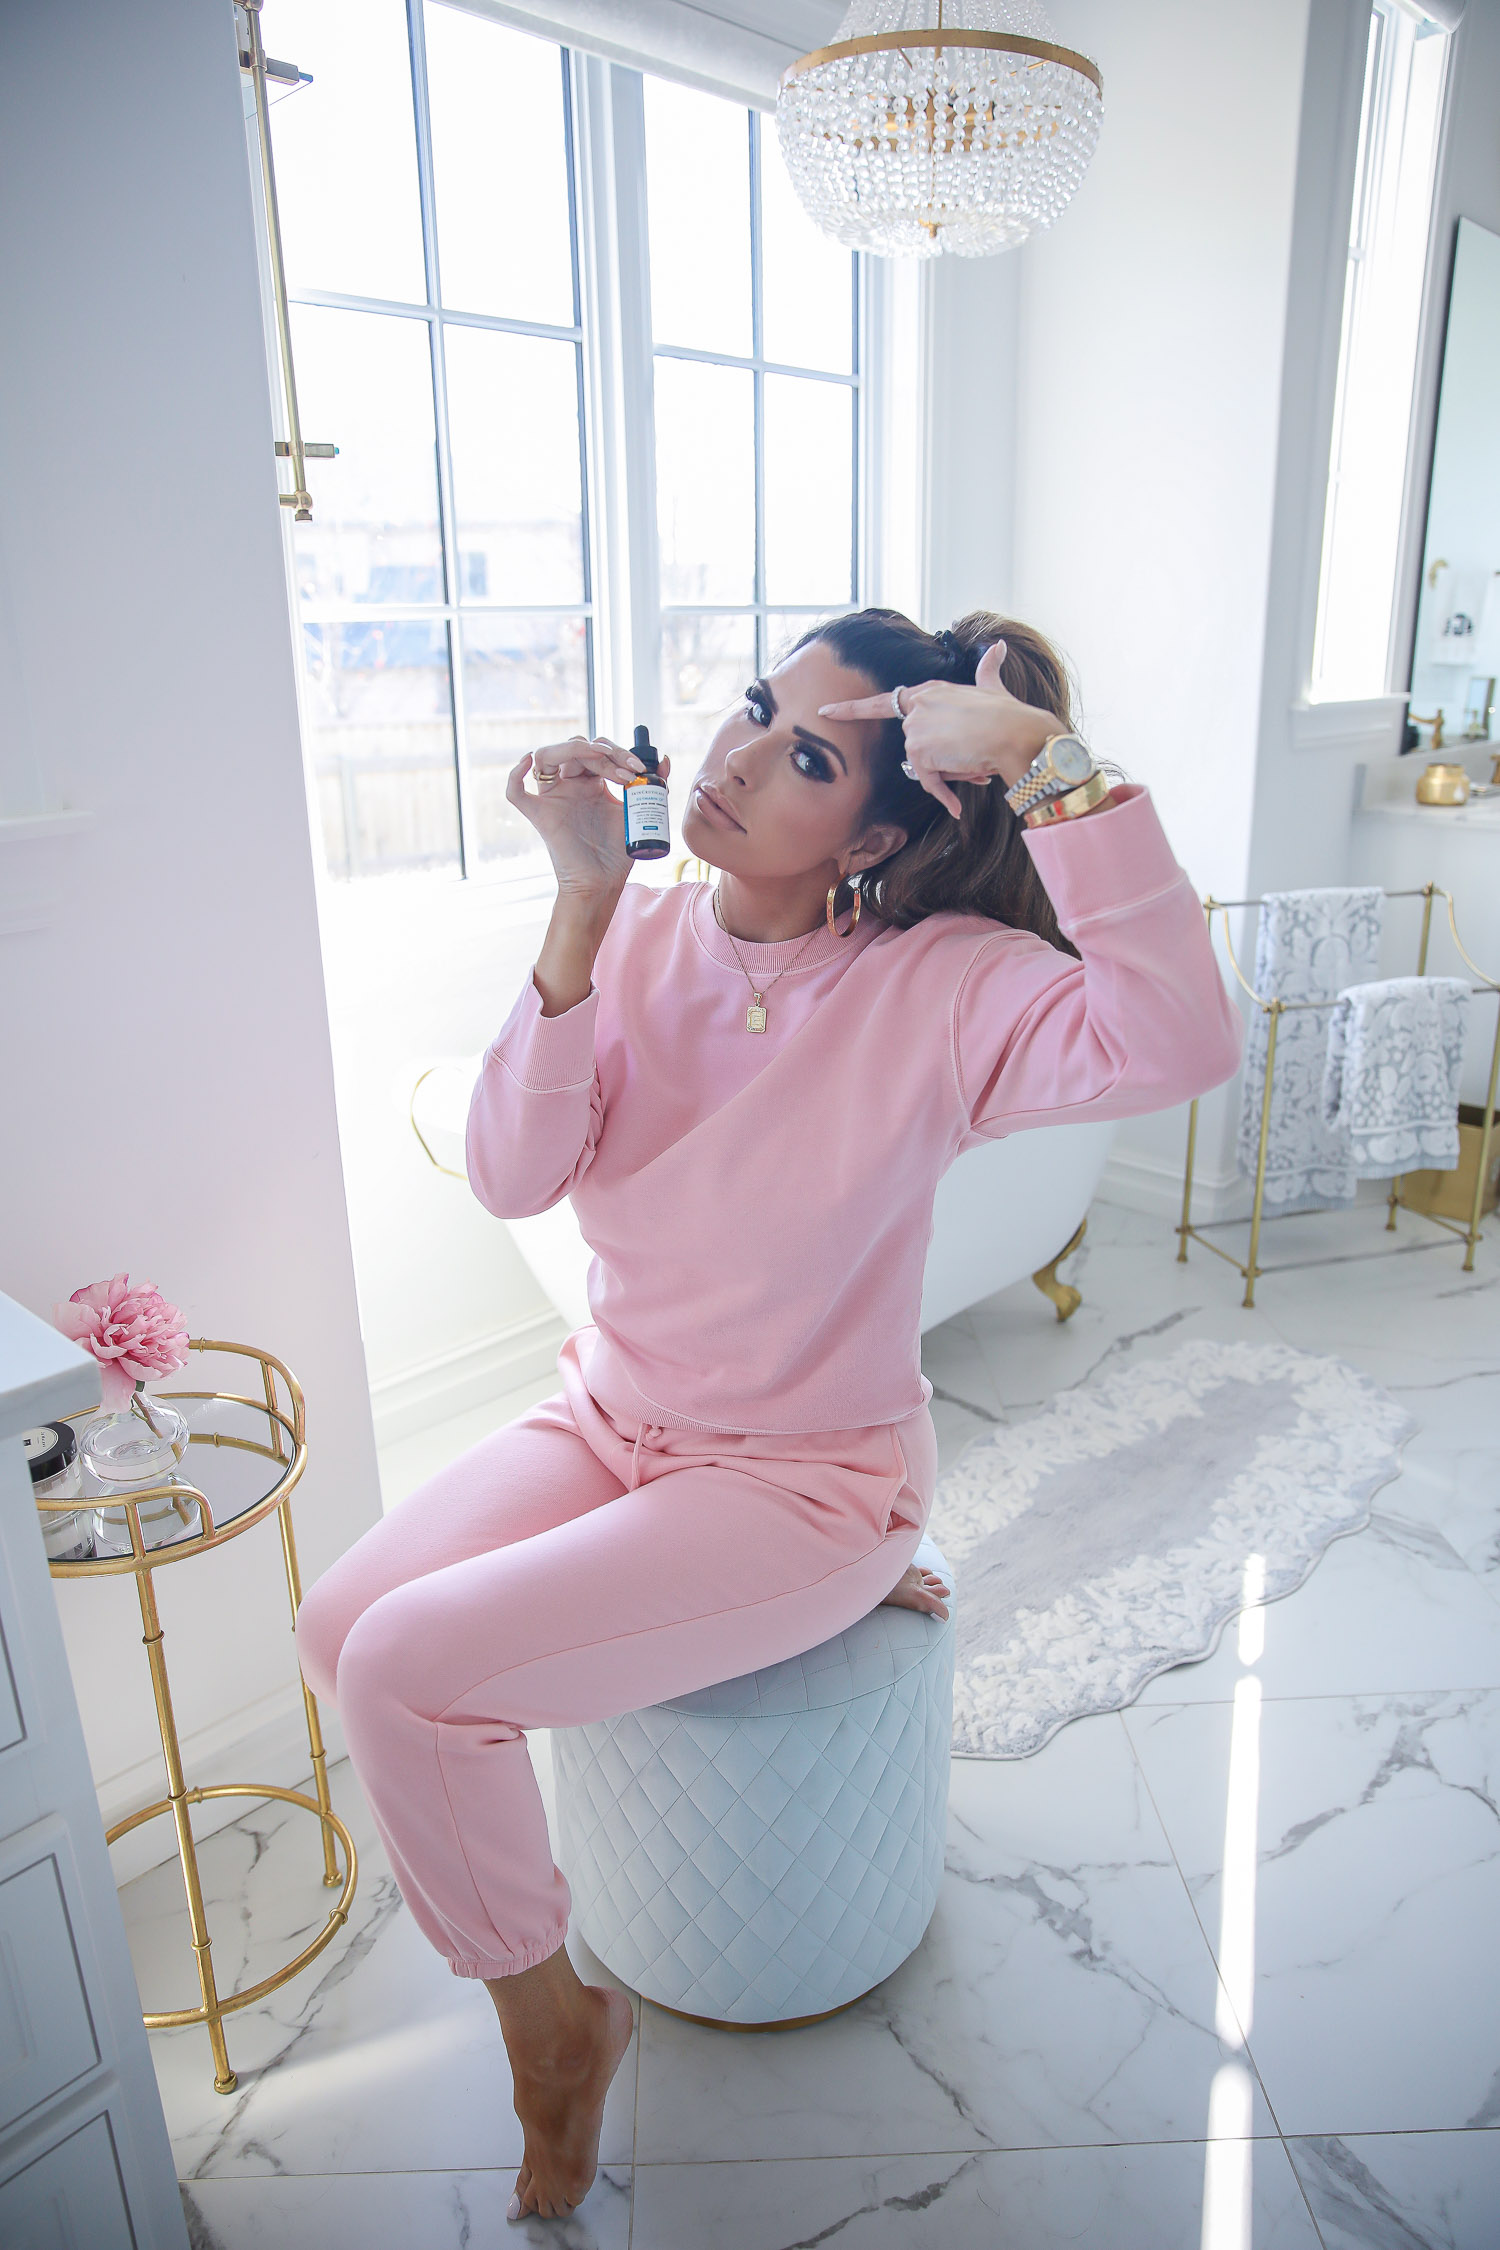 Skinceuticals CE Ferulic SilyMarin Phloretin CF, best Vitamim C serum, CE Ferulic vs Phloretin CF, why do you need Vitamin C, emily gemma skincare |Vitamin C Skincare by popular beauty blog, The Sweetest Thing: image of Emily Gemma sitting on a blue tuft stool in her bathroom and wearing a pink sweatsuit while holding a bottle SkinCeuticals skin care product. 